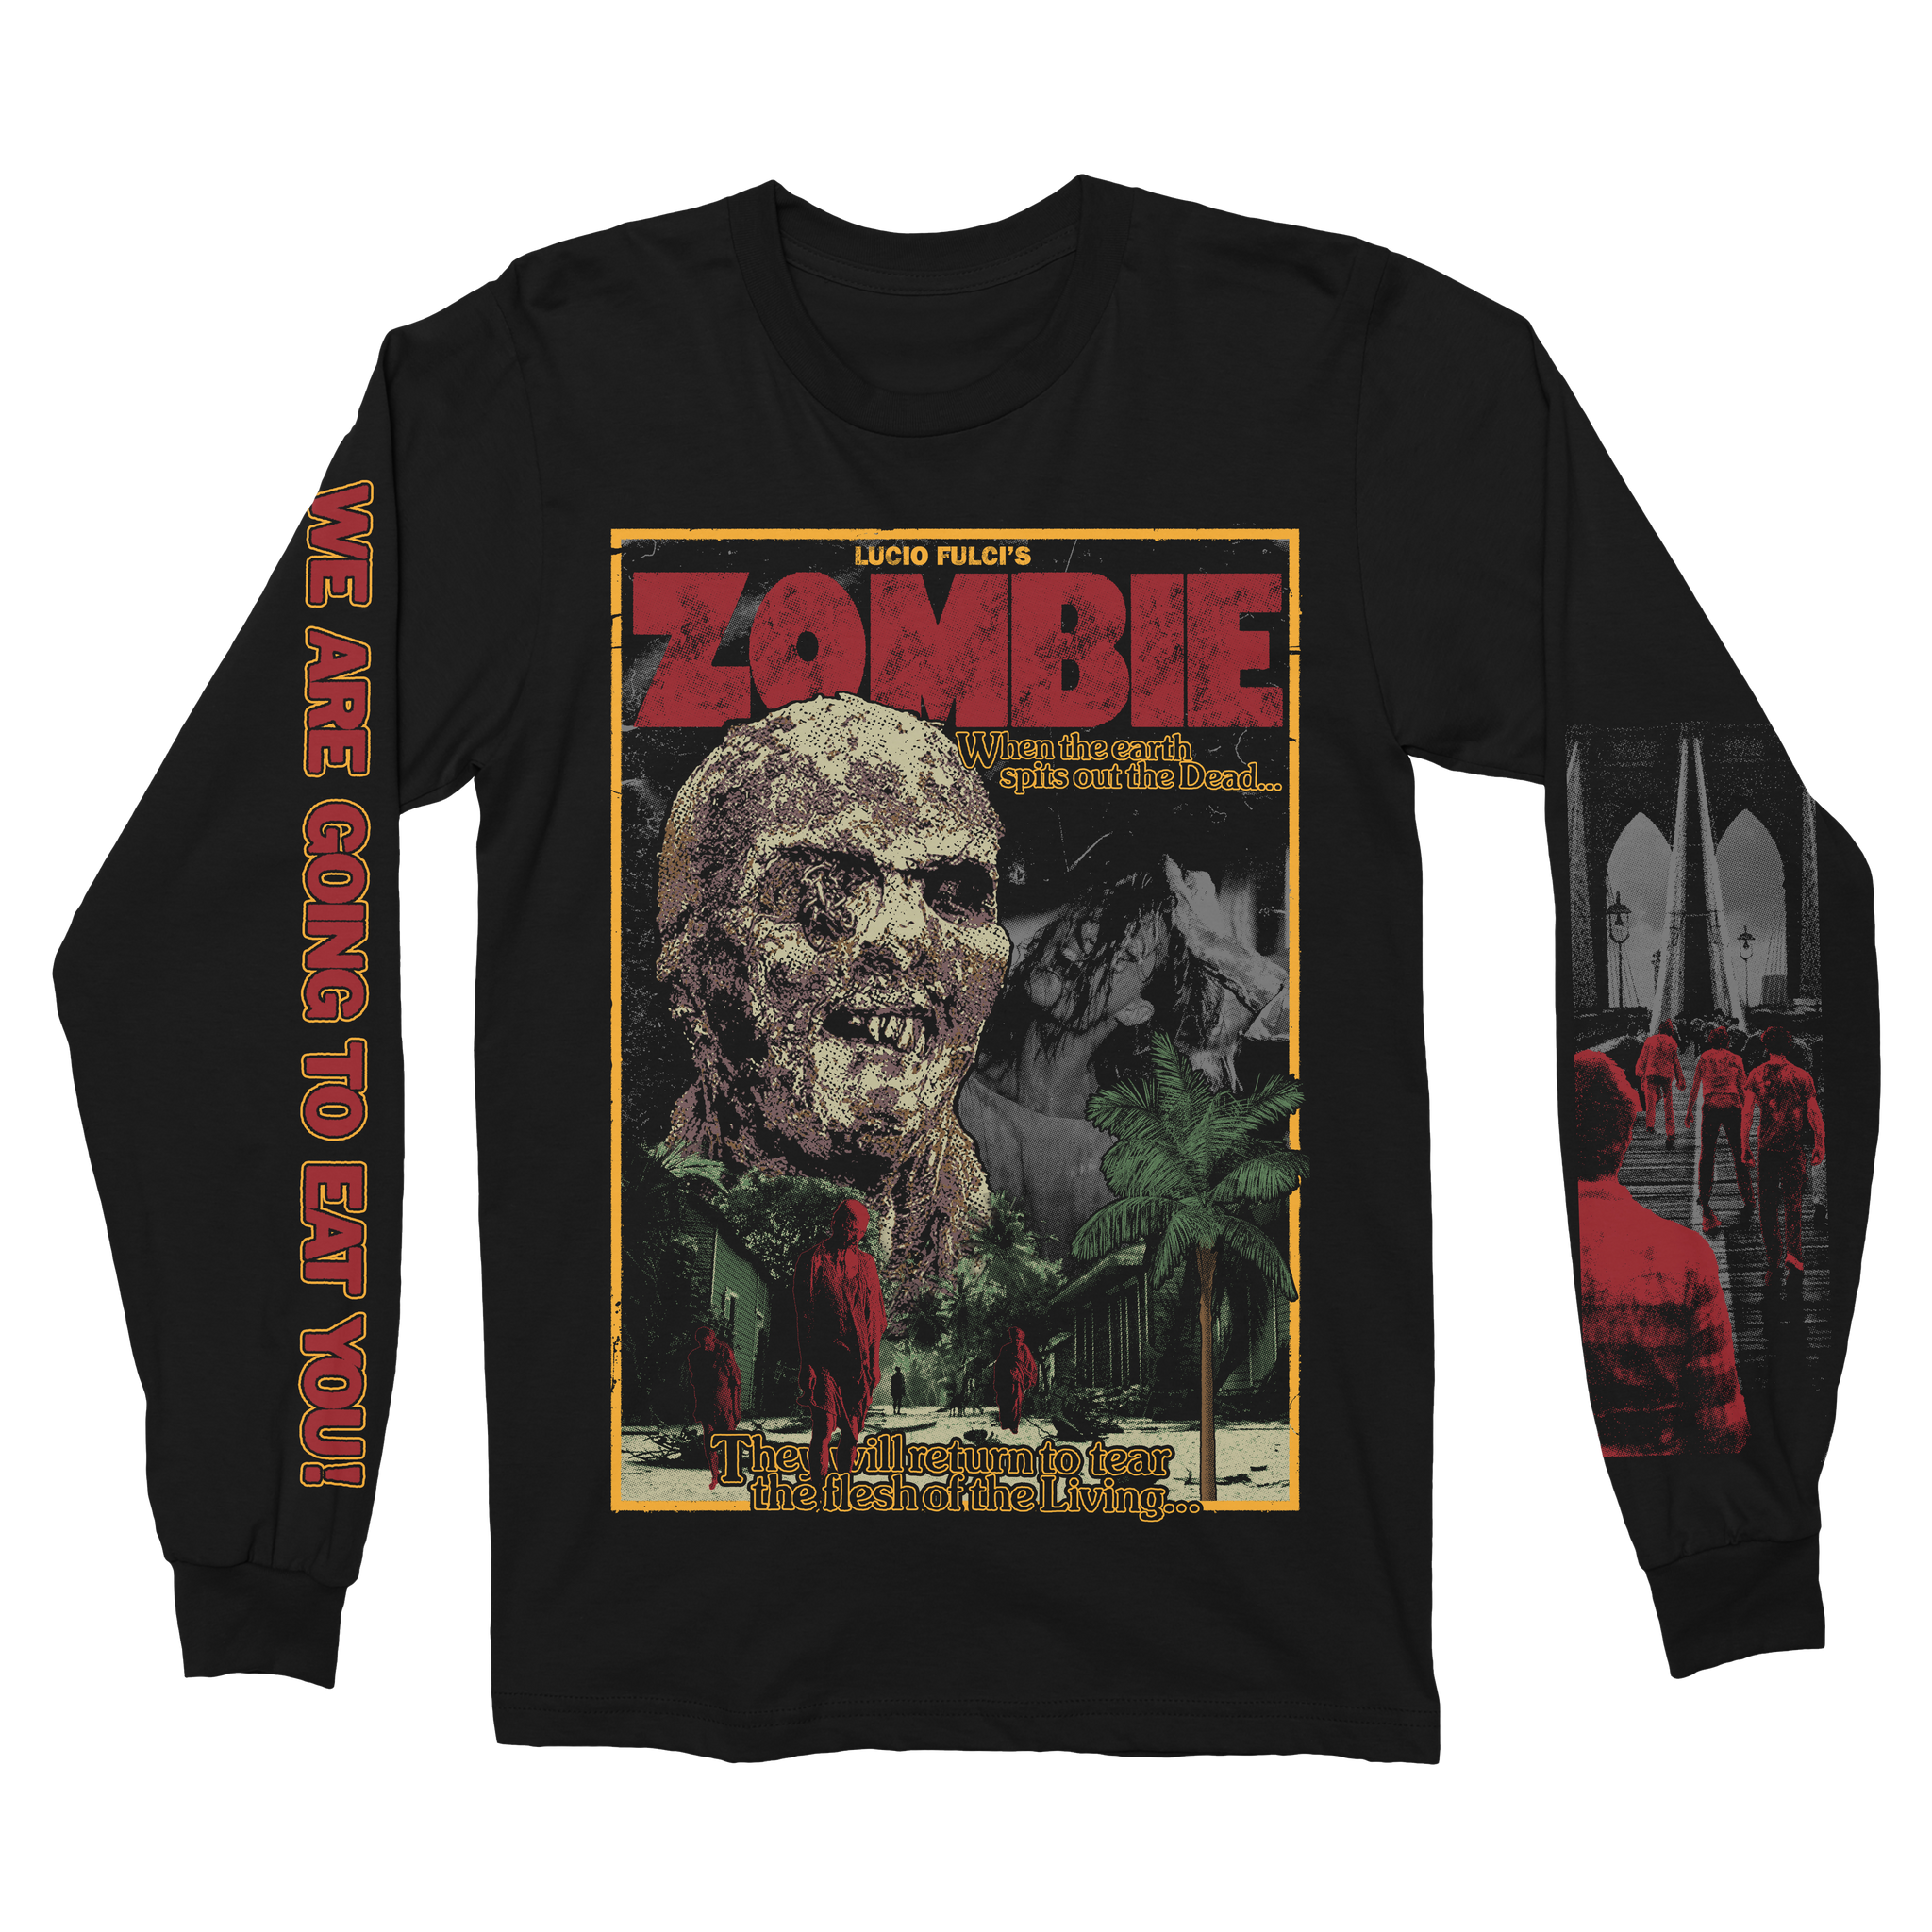 LUCIO FULCI'S ZOMBIE "SPIT OUT" LONG SLEEVE T-SHIRT